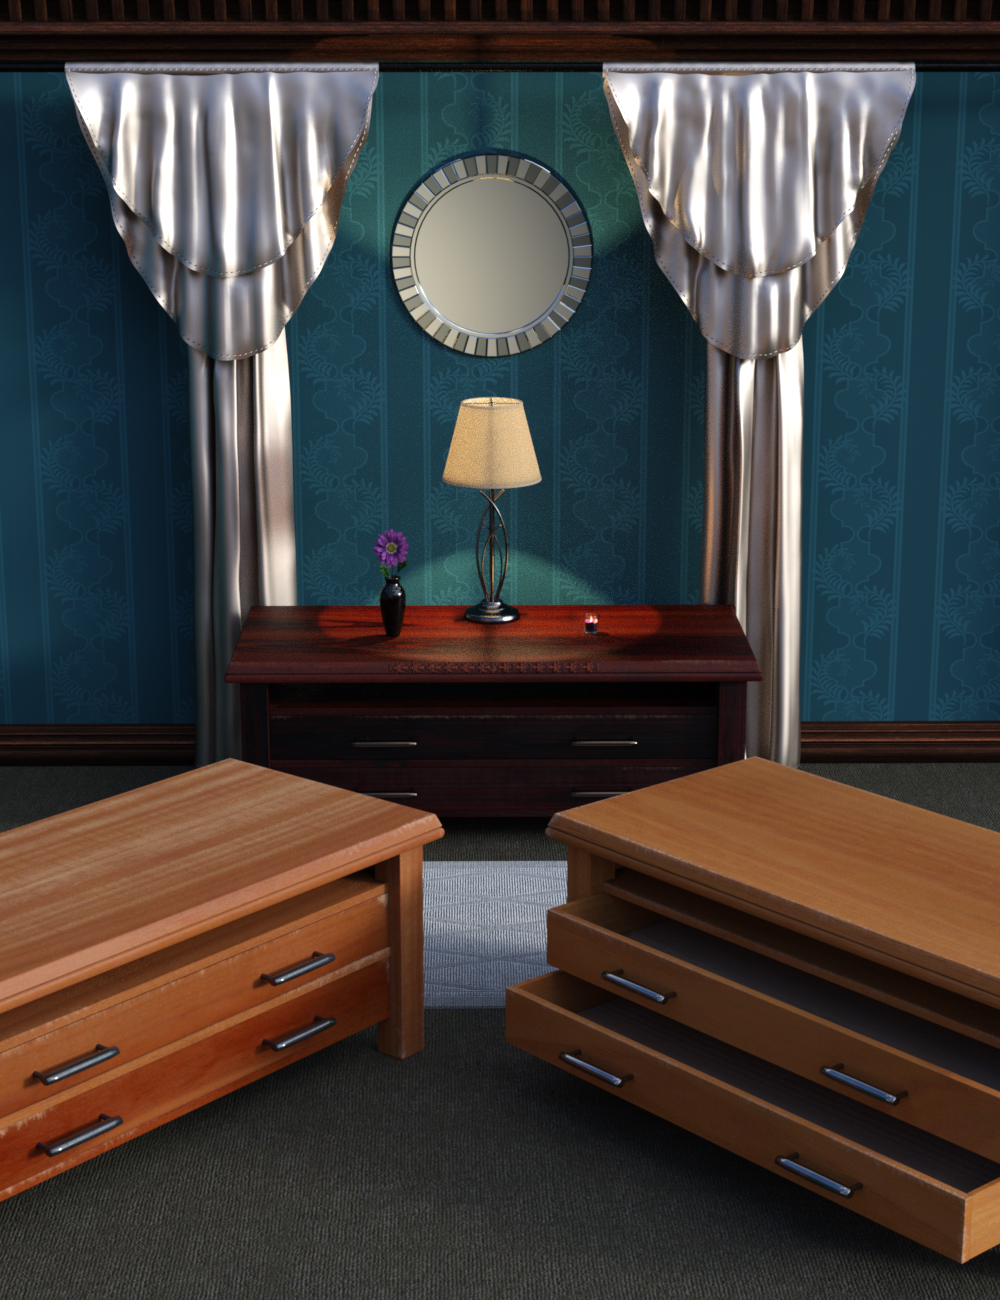 Furniture Frenzy by: ARTCollab, 3D Models by Daz 3D